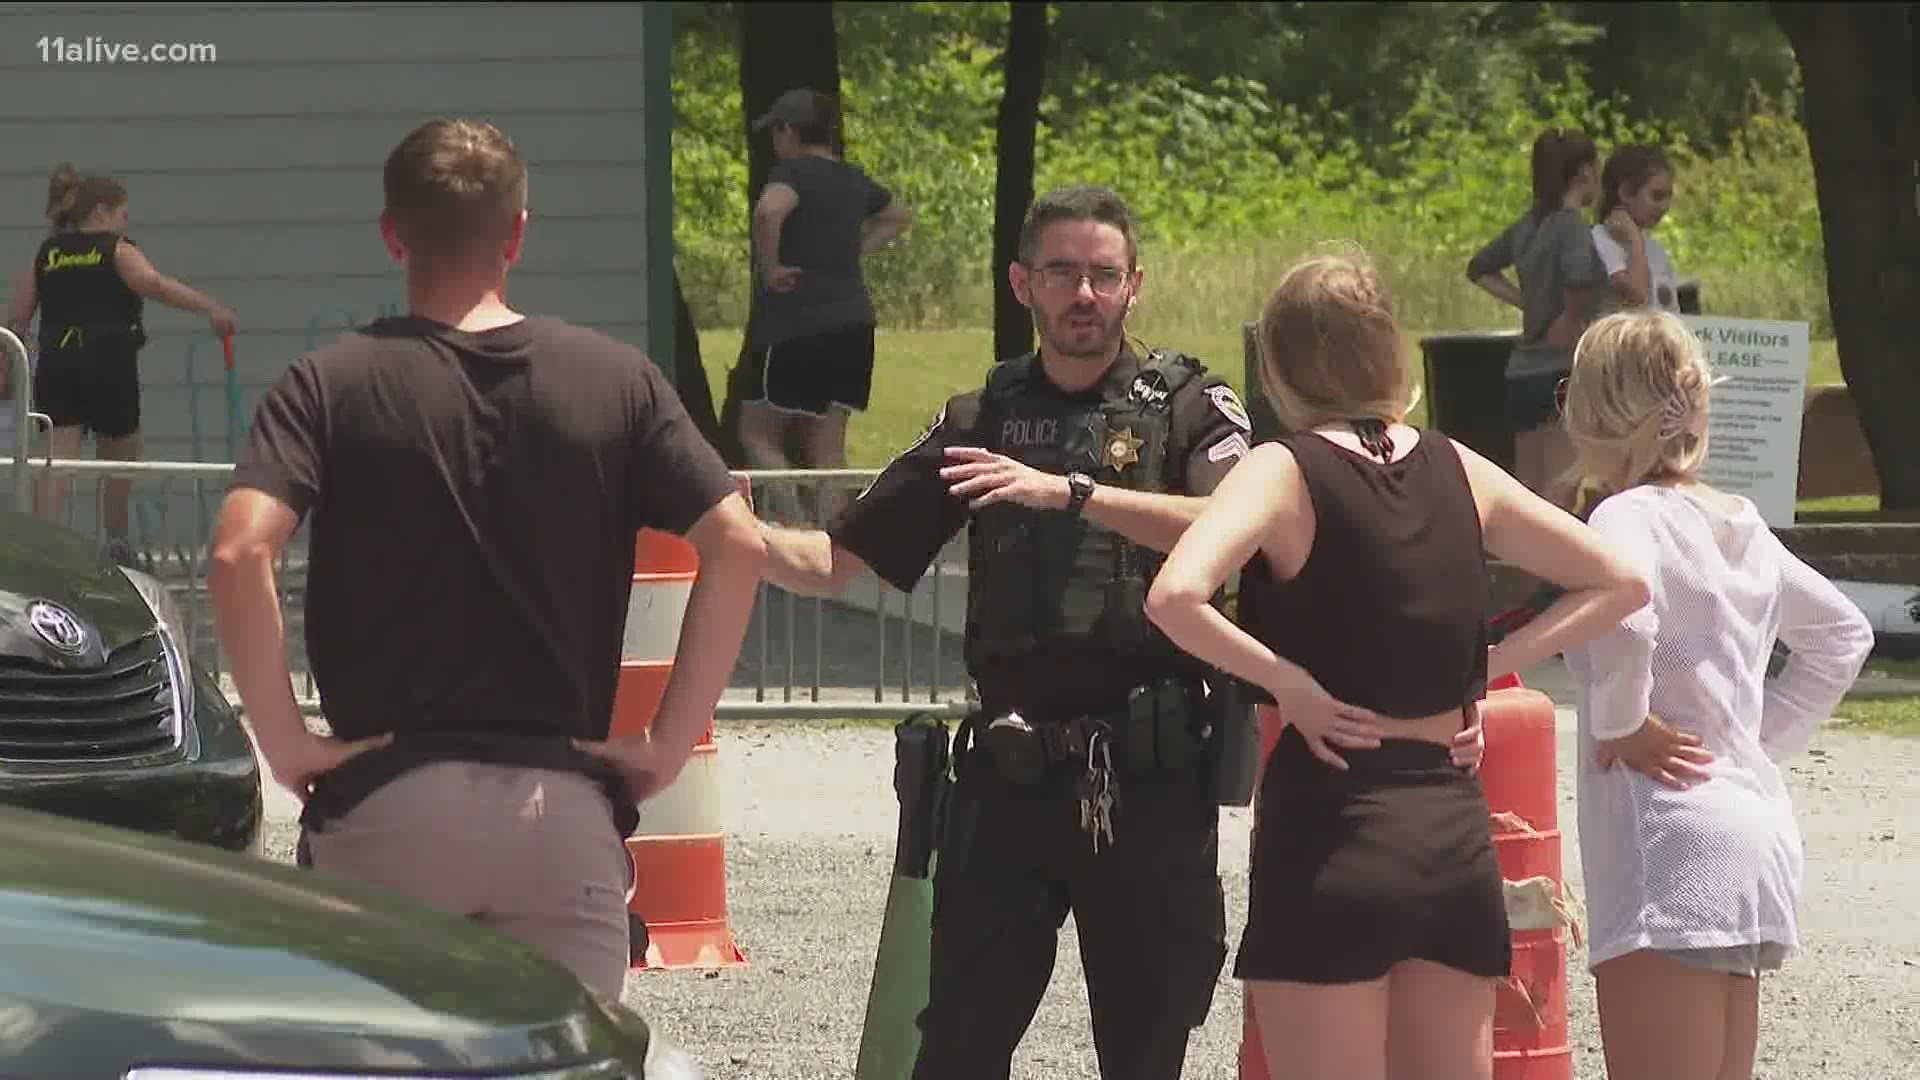 Even as Georgians flock to their favorite Memorial Day destinations, state agencies like the DNR are trying to make sure they stay safe in the process.